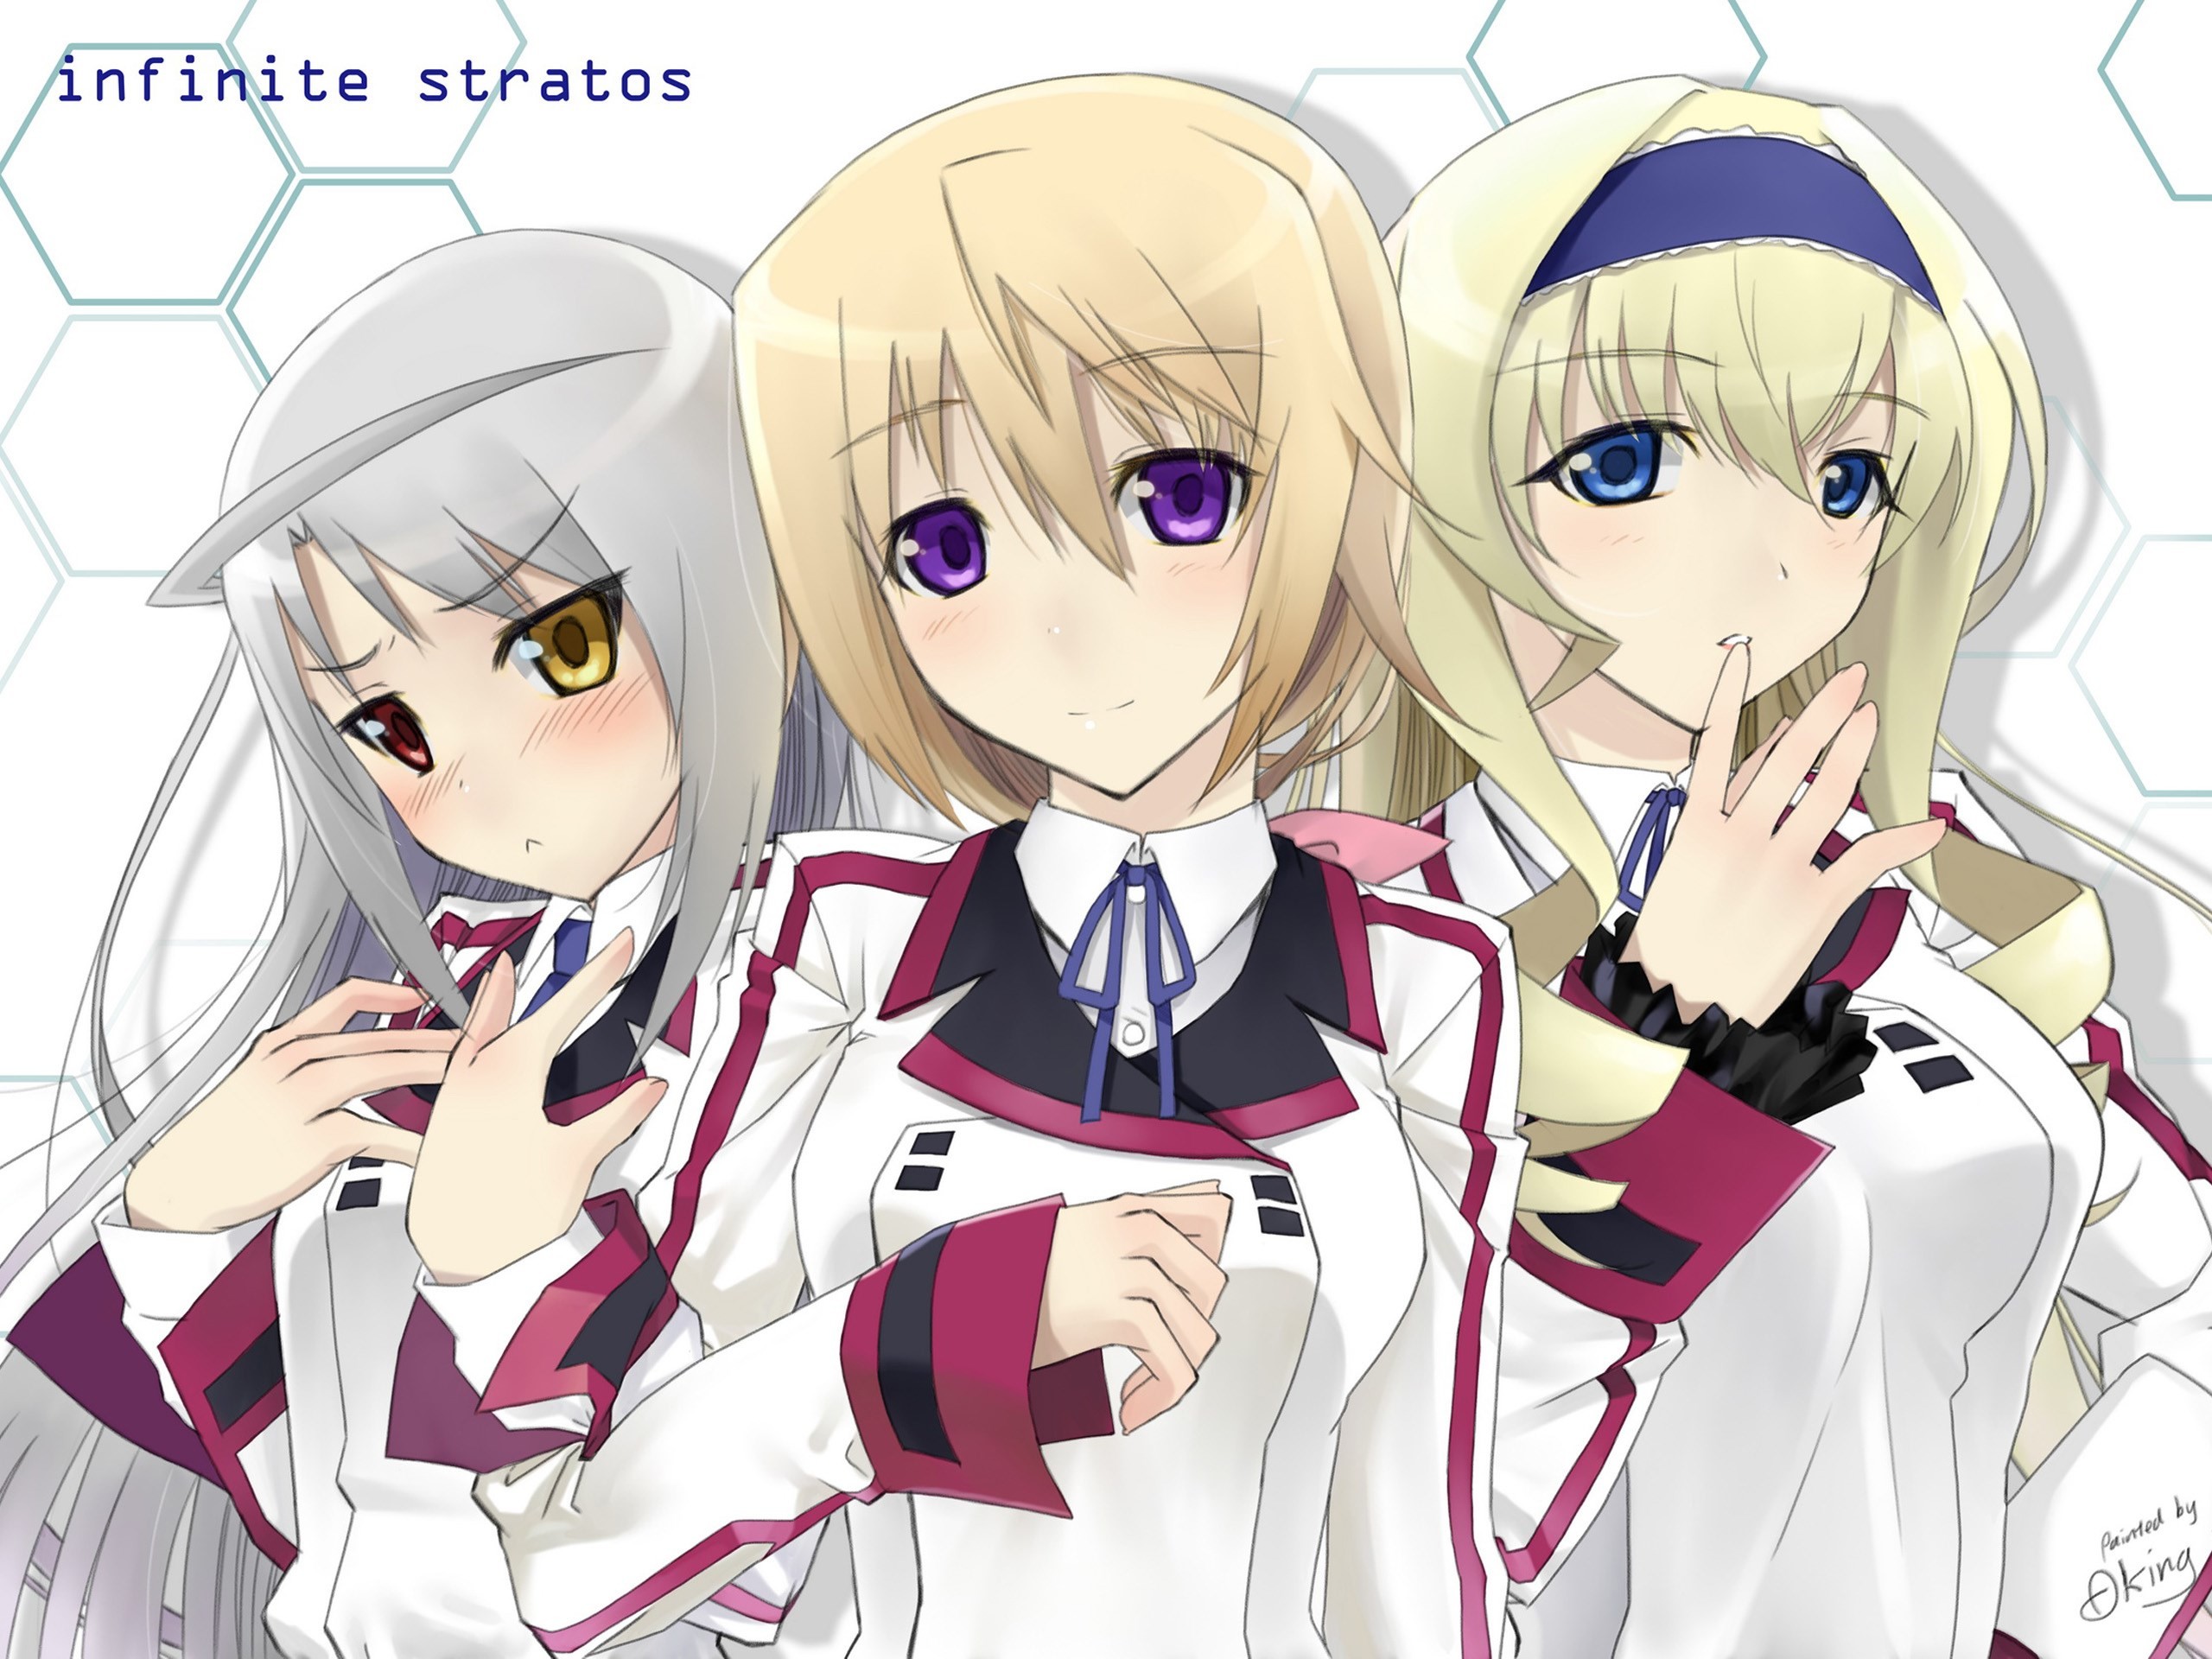 2560x1920 High Resolution Wallpapers infinite stratos wallpaper by Boyce London  (2017-03-18)